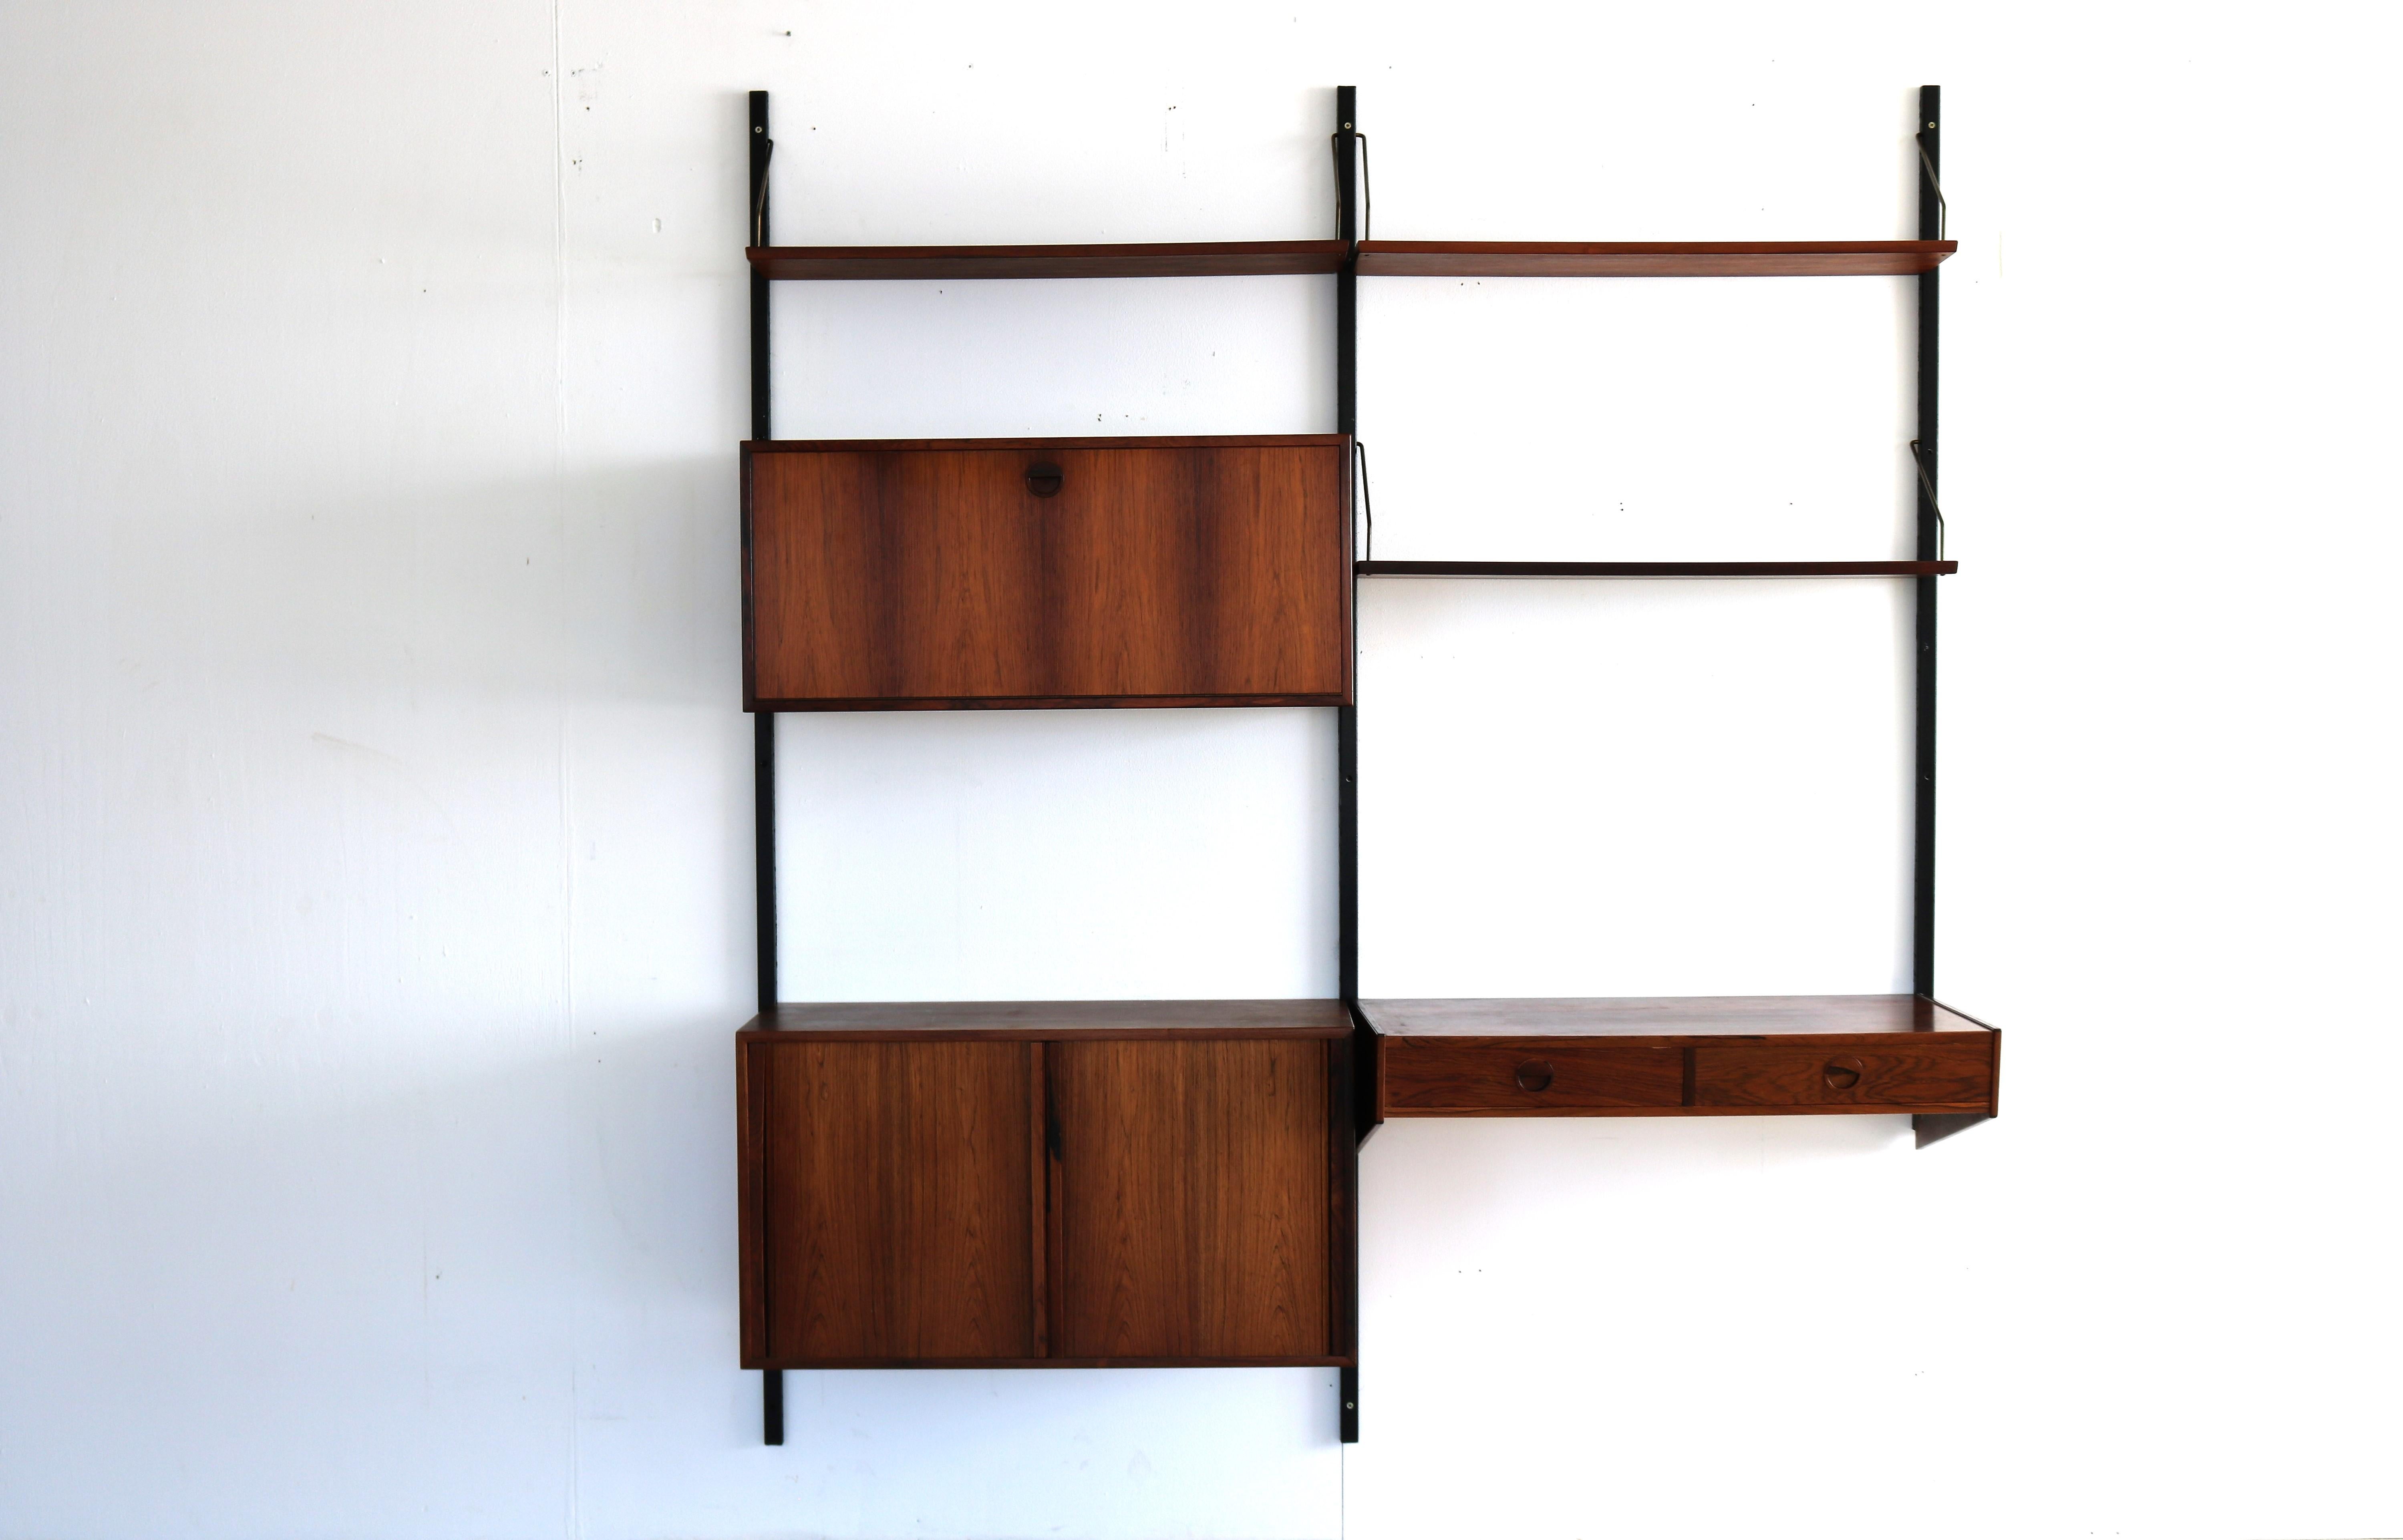 vintage wall system rosewood HG Furniture Danish (4)

Rosewood wall system from HG Furniture. The system is of high quality and can be arranged according to your own wishes.

Period 1960s
Designs HG Furniture Denmark
Conditions good light